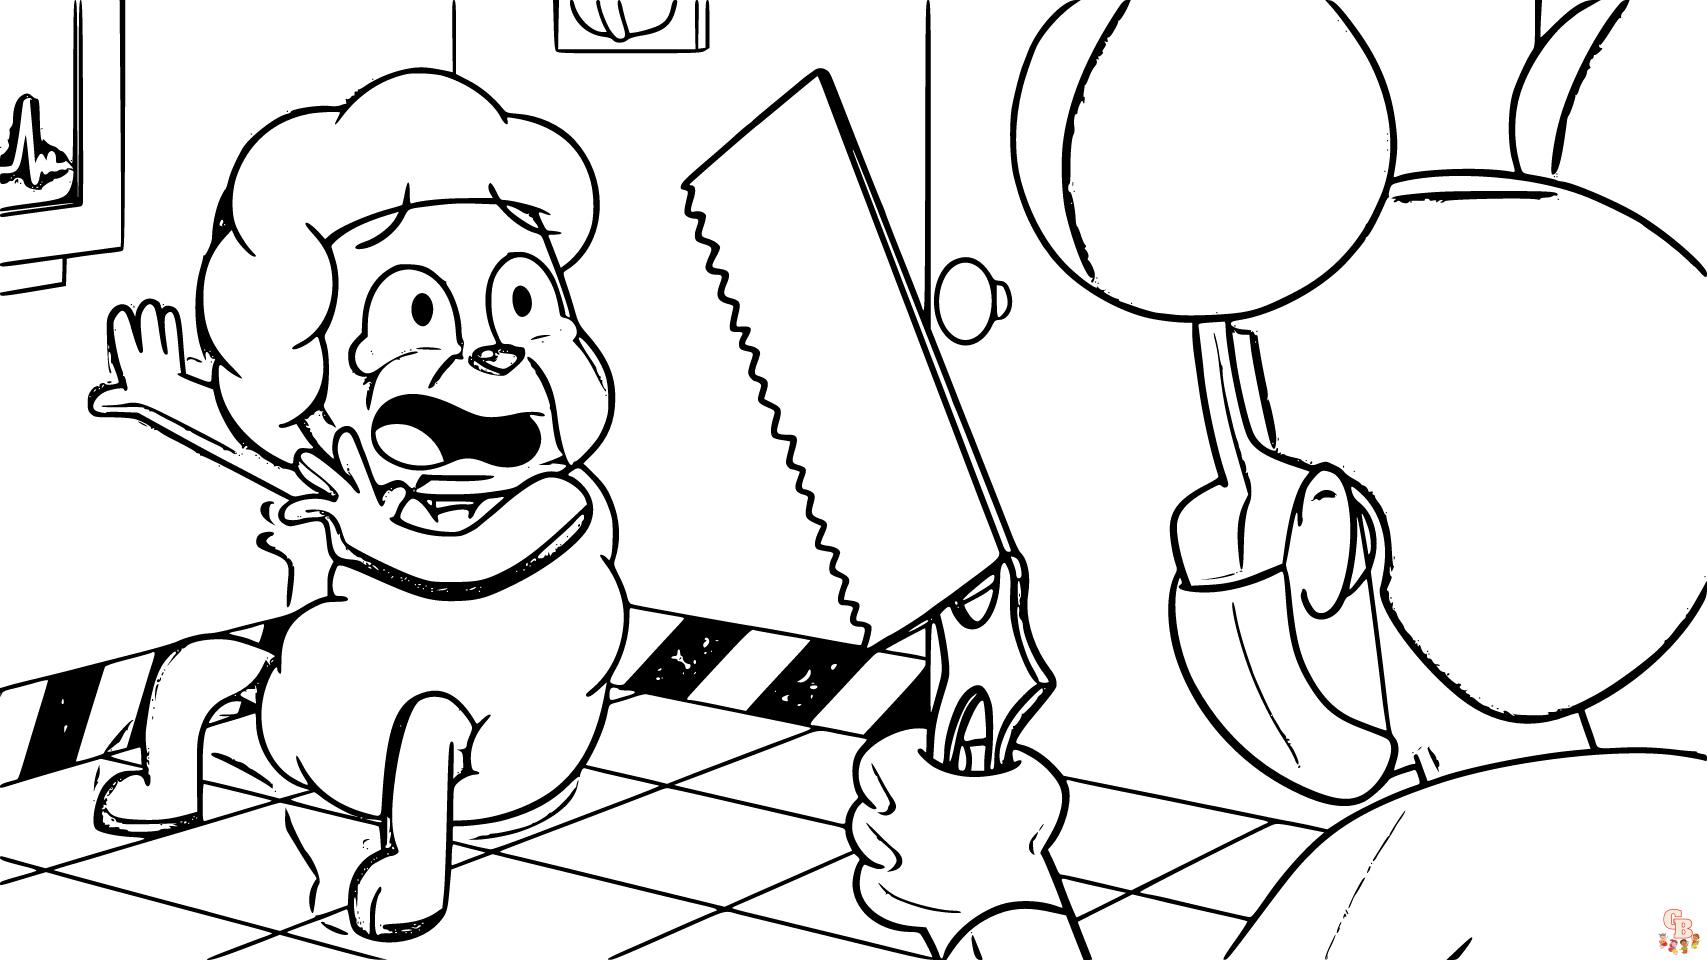 Amanda the Adventurer coloring pages to print